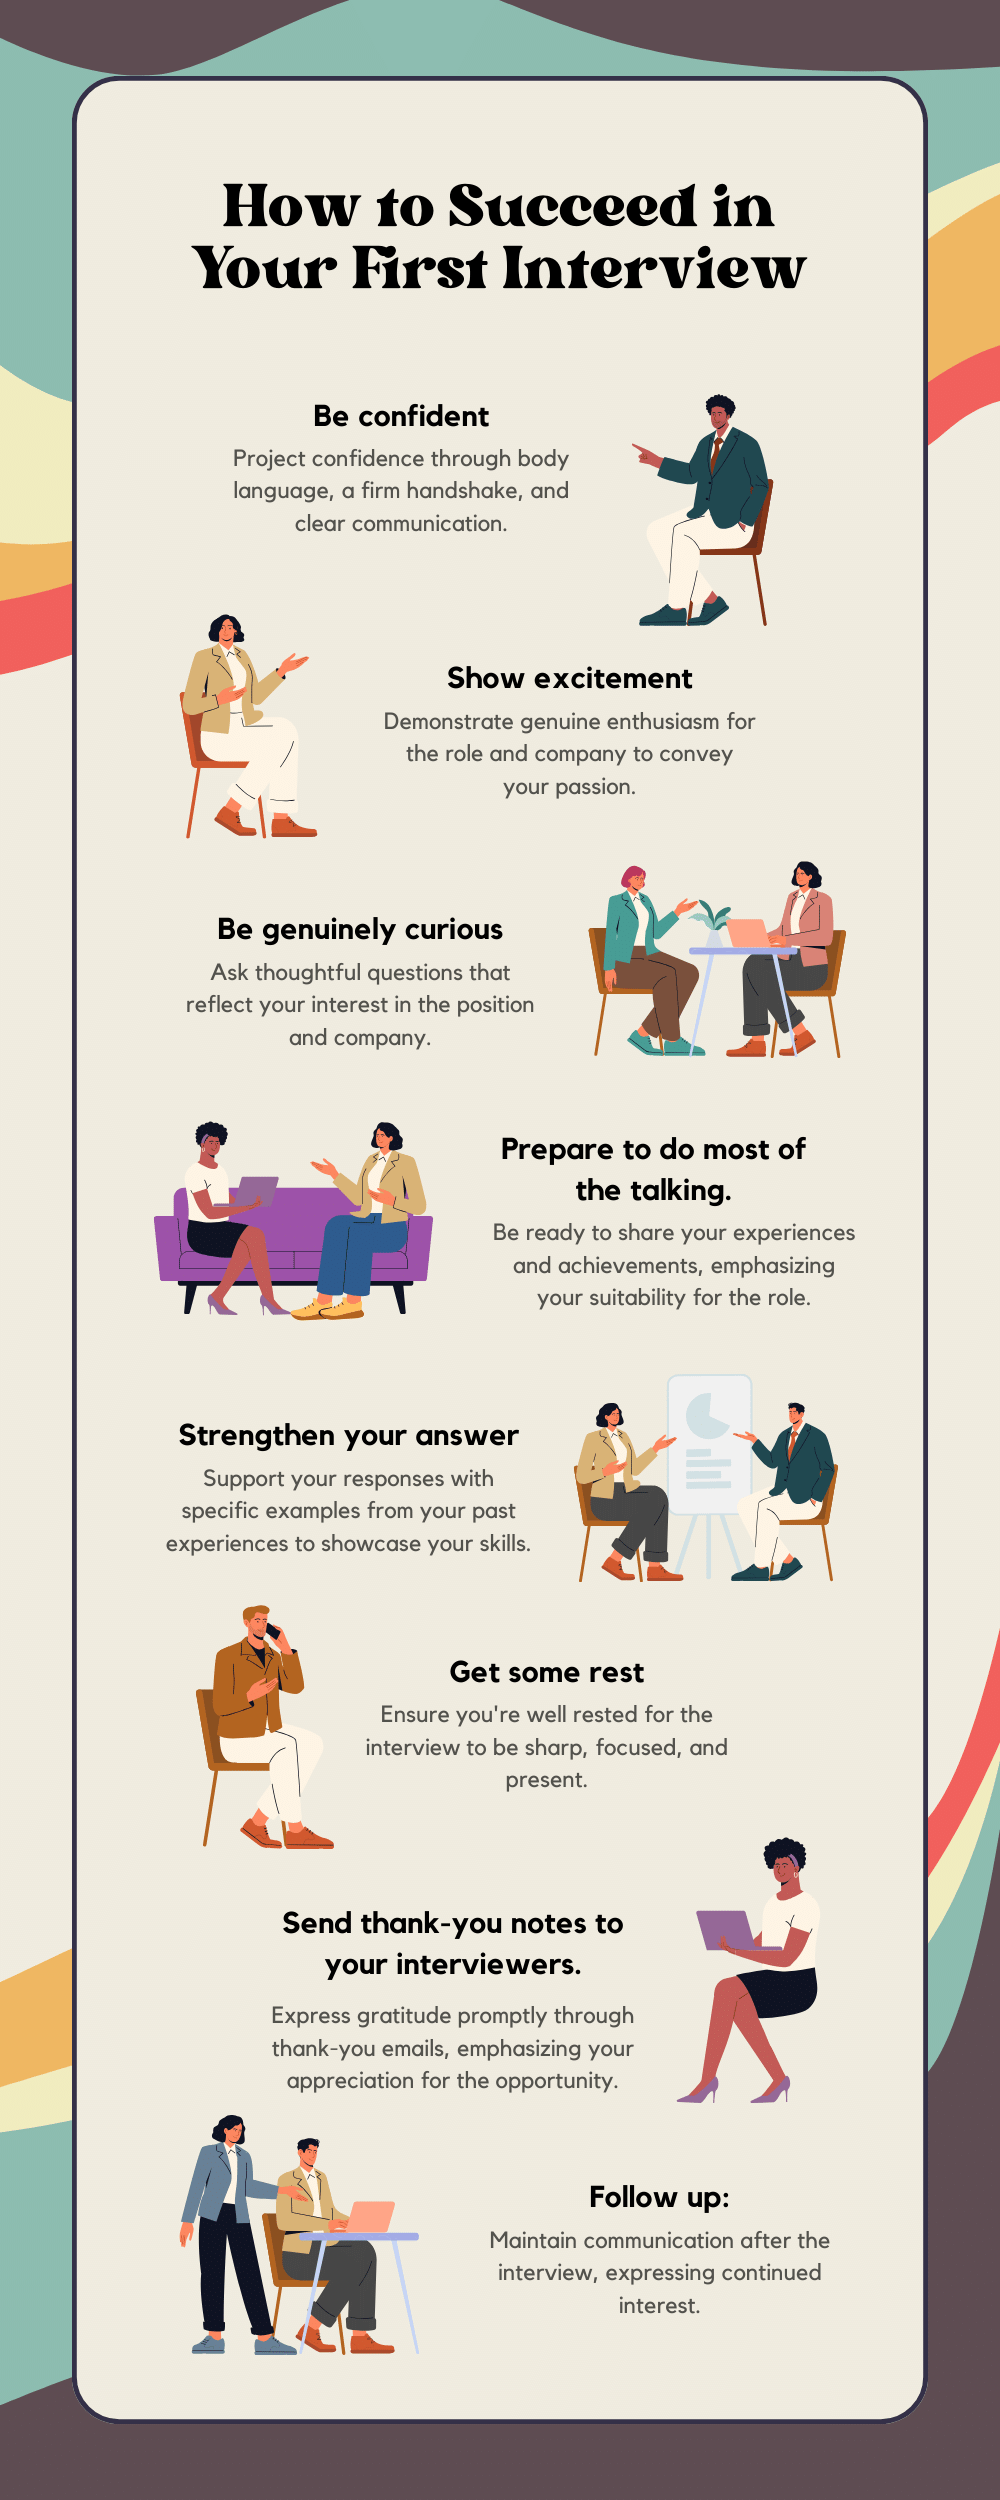 How to Succeed in Your First Interview